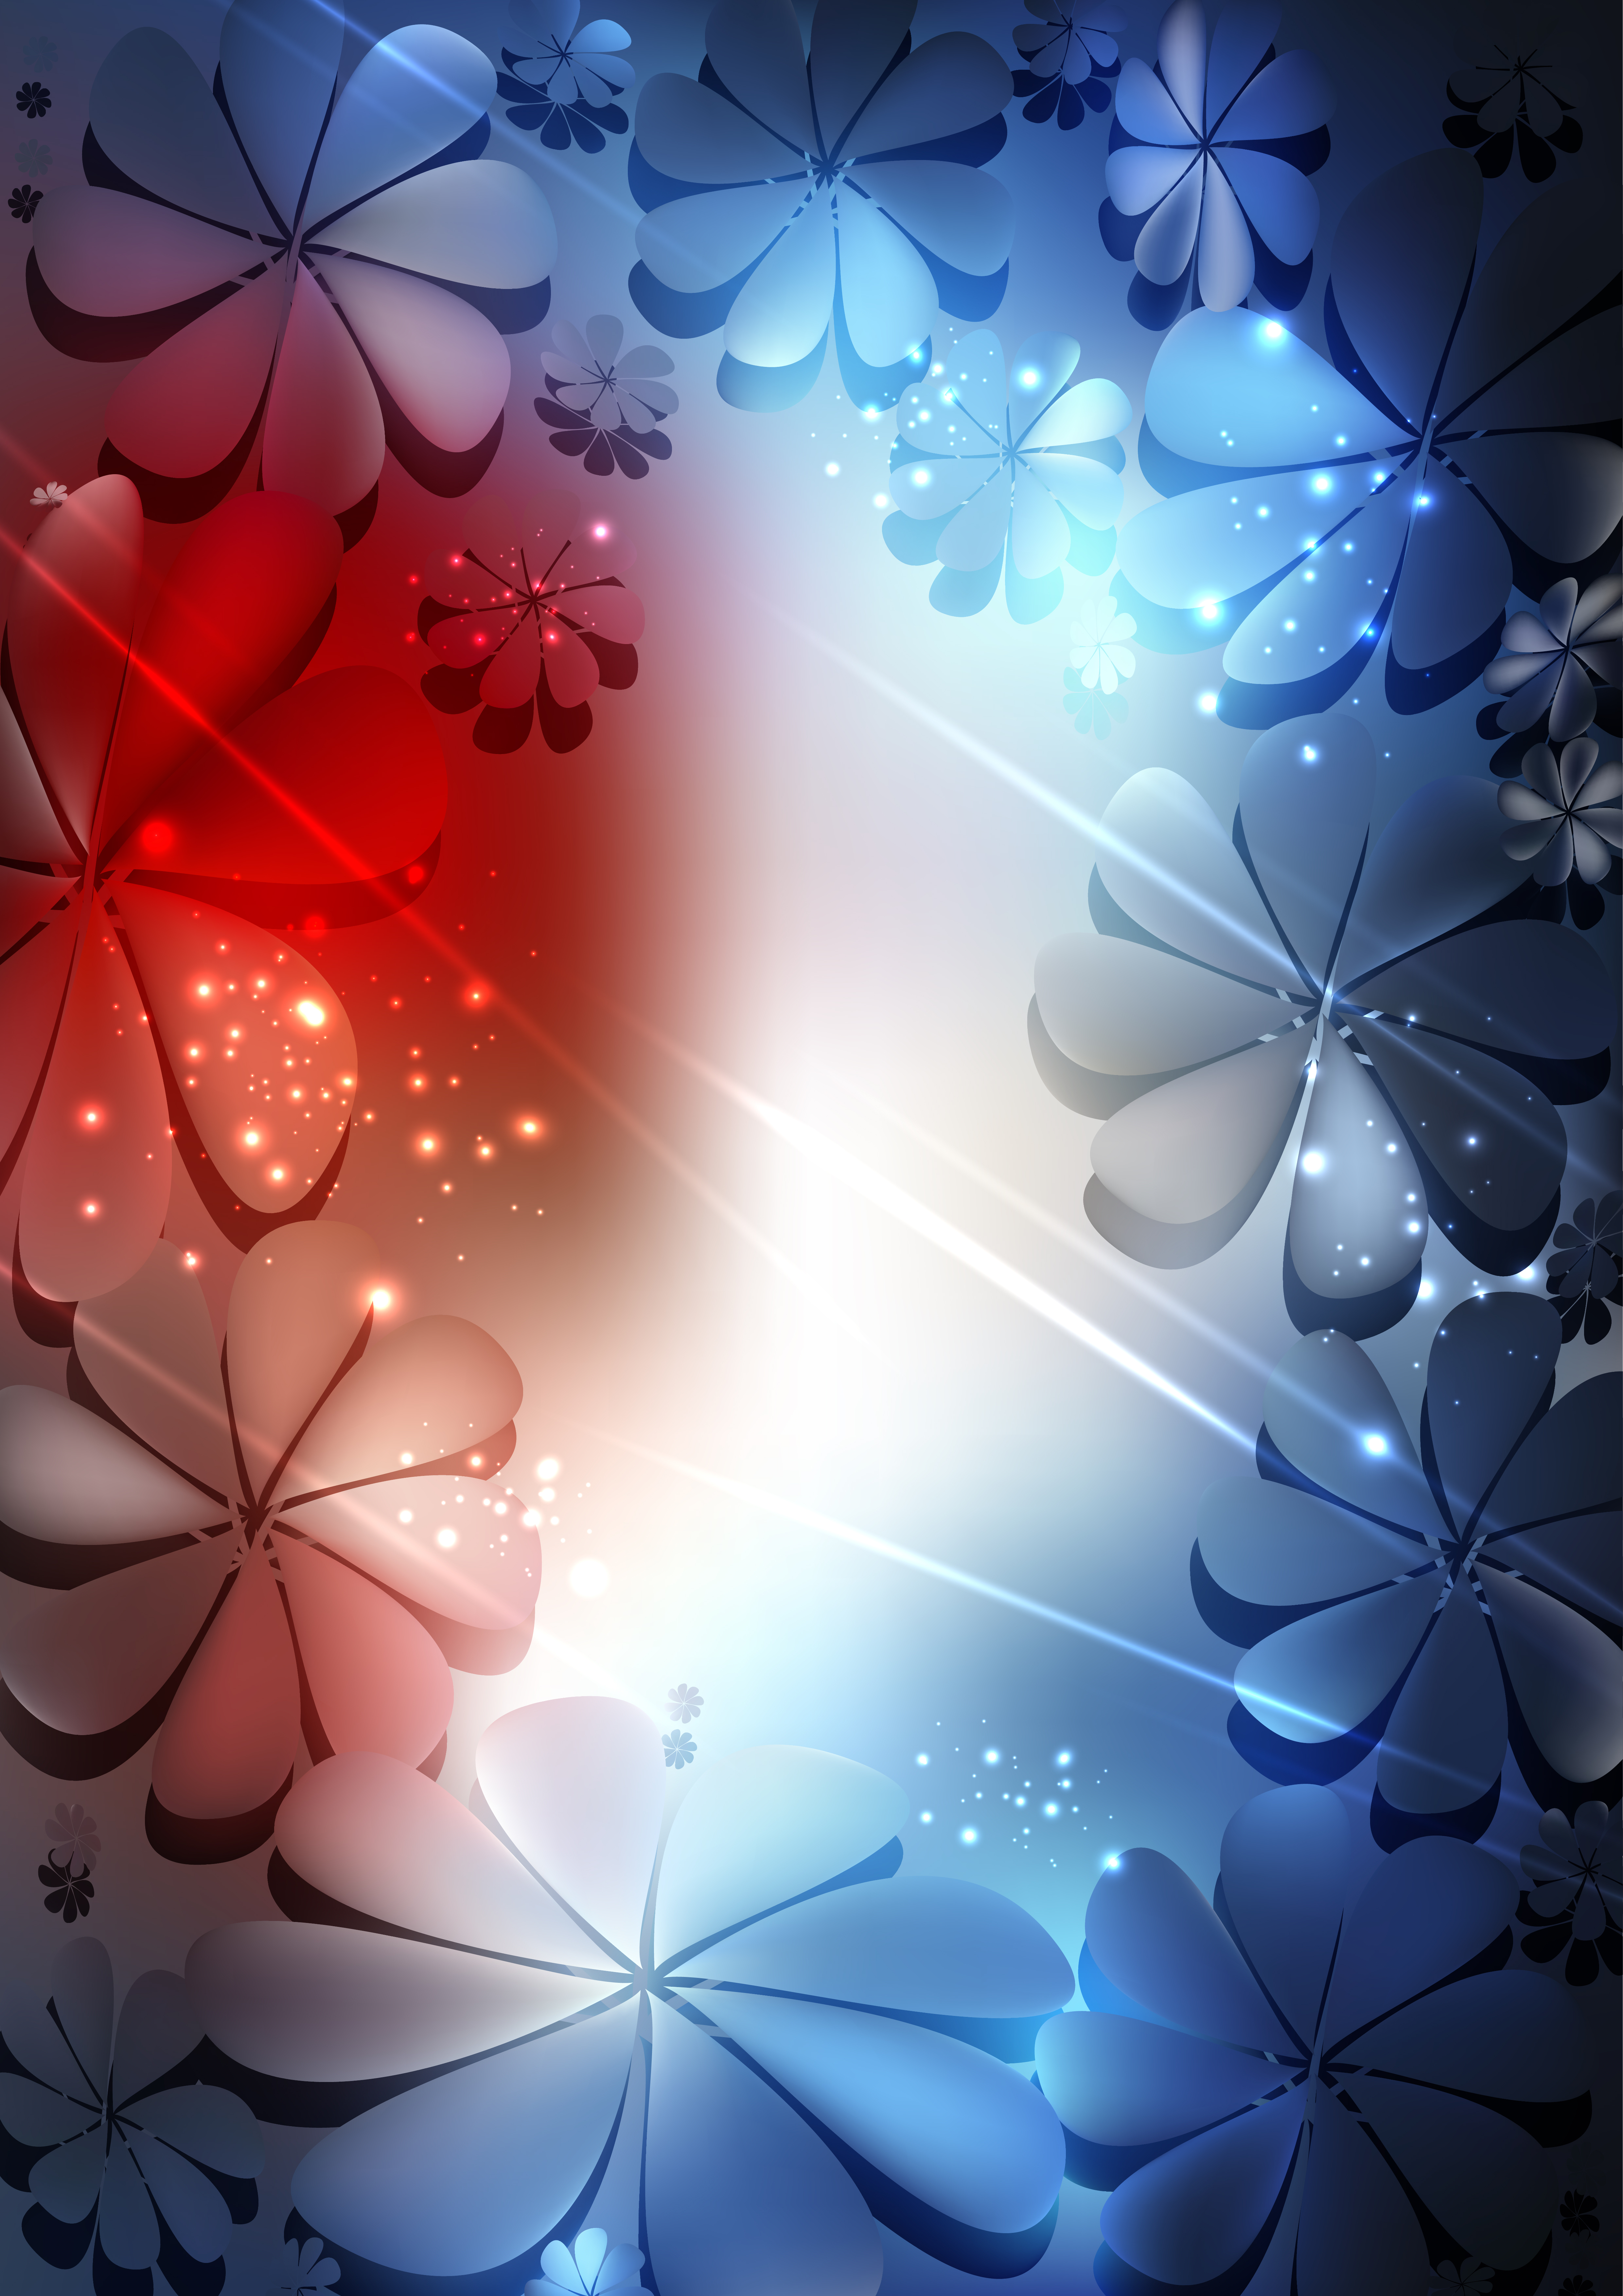 Free Red White and Blue Flower Background Illustration